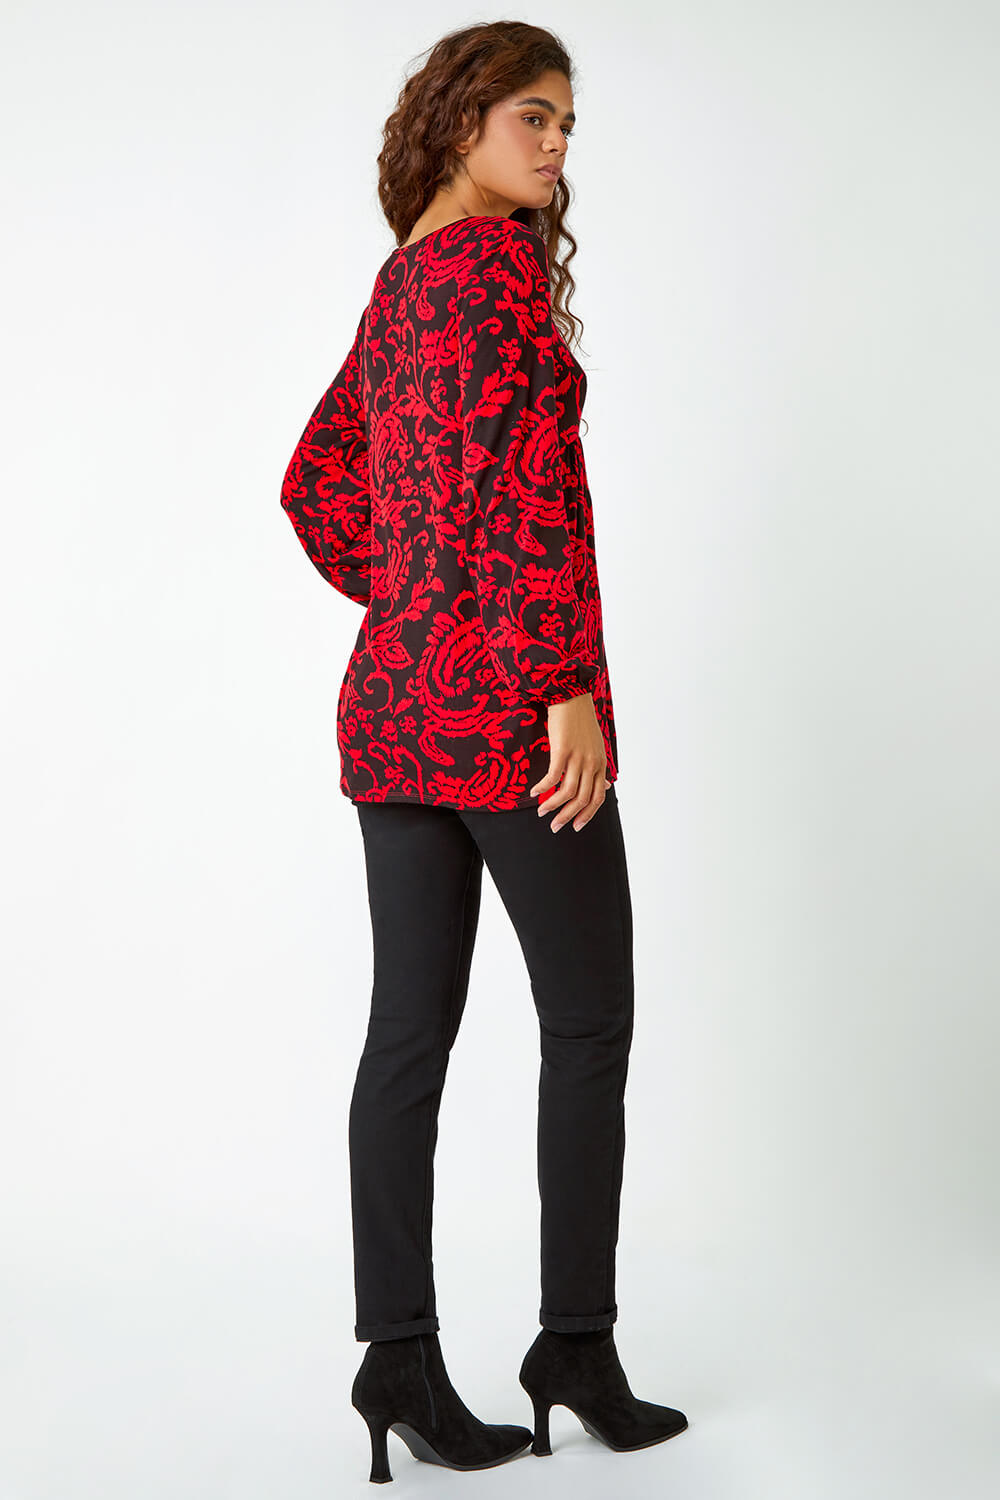 Red Floral Pocket Detail Tunic Stretch Top, Image 3 of 5